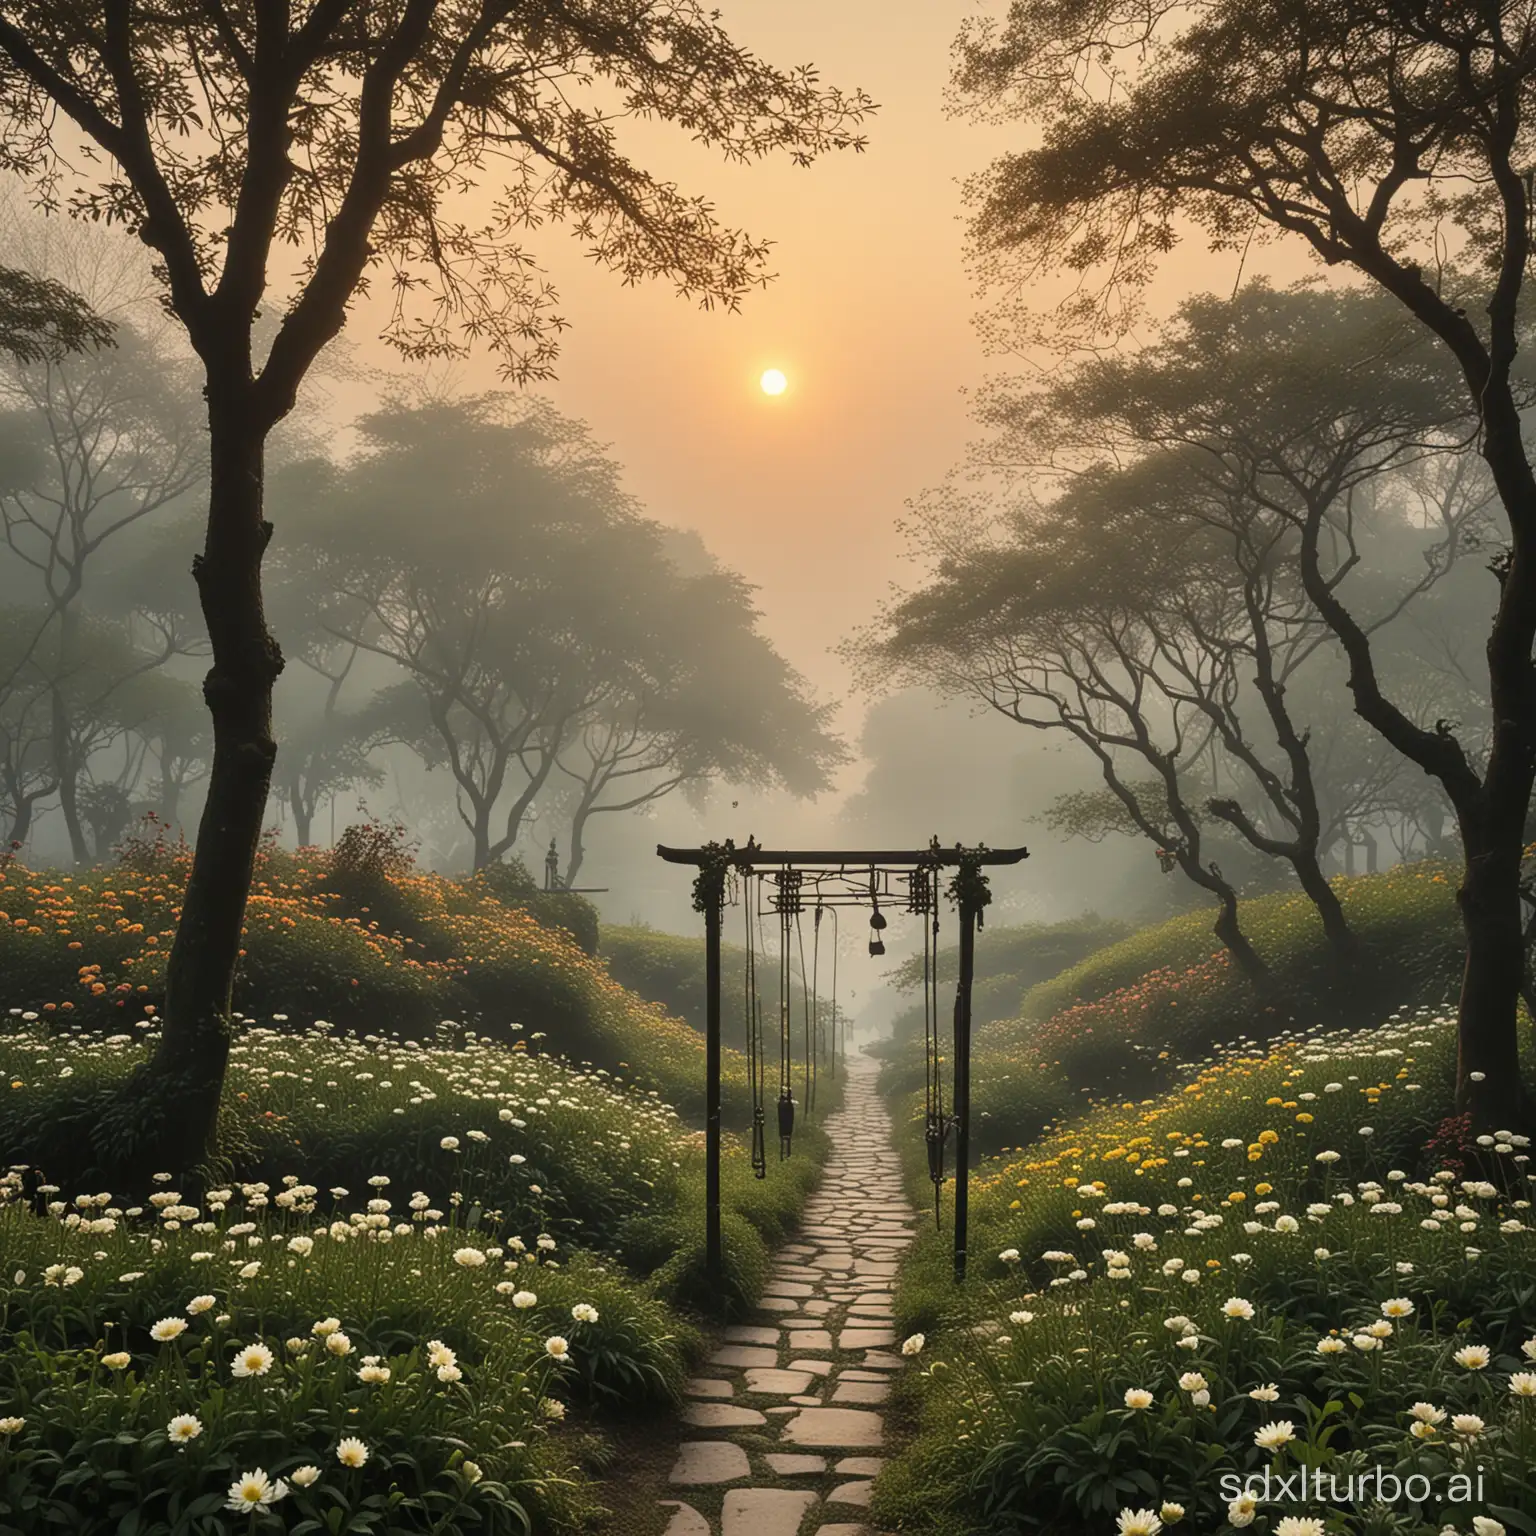 Distant mountains like ink, smoke and mist linger around the green Jiangnan, three paths chrysanthemums gently unfold the traces of my heart's door along the ink fragrance, the pensive woman on the vine swing picks up a moss memory in the sunset's alley, flowing silhouette in the lush season.